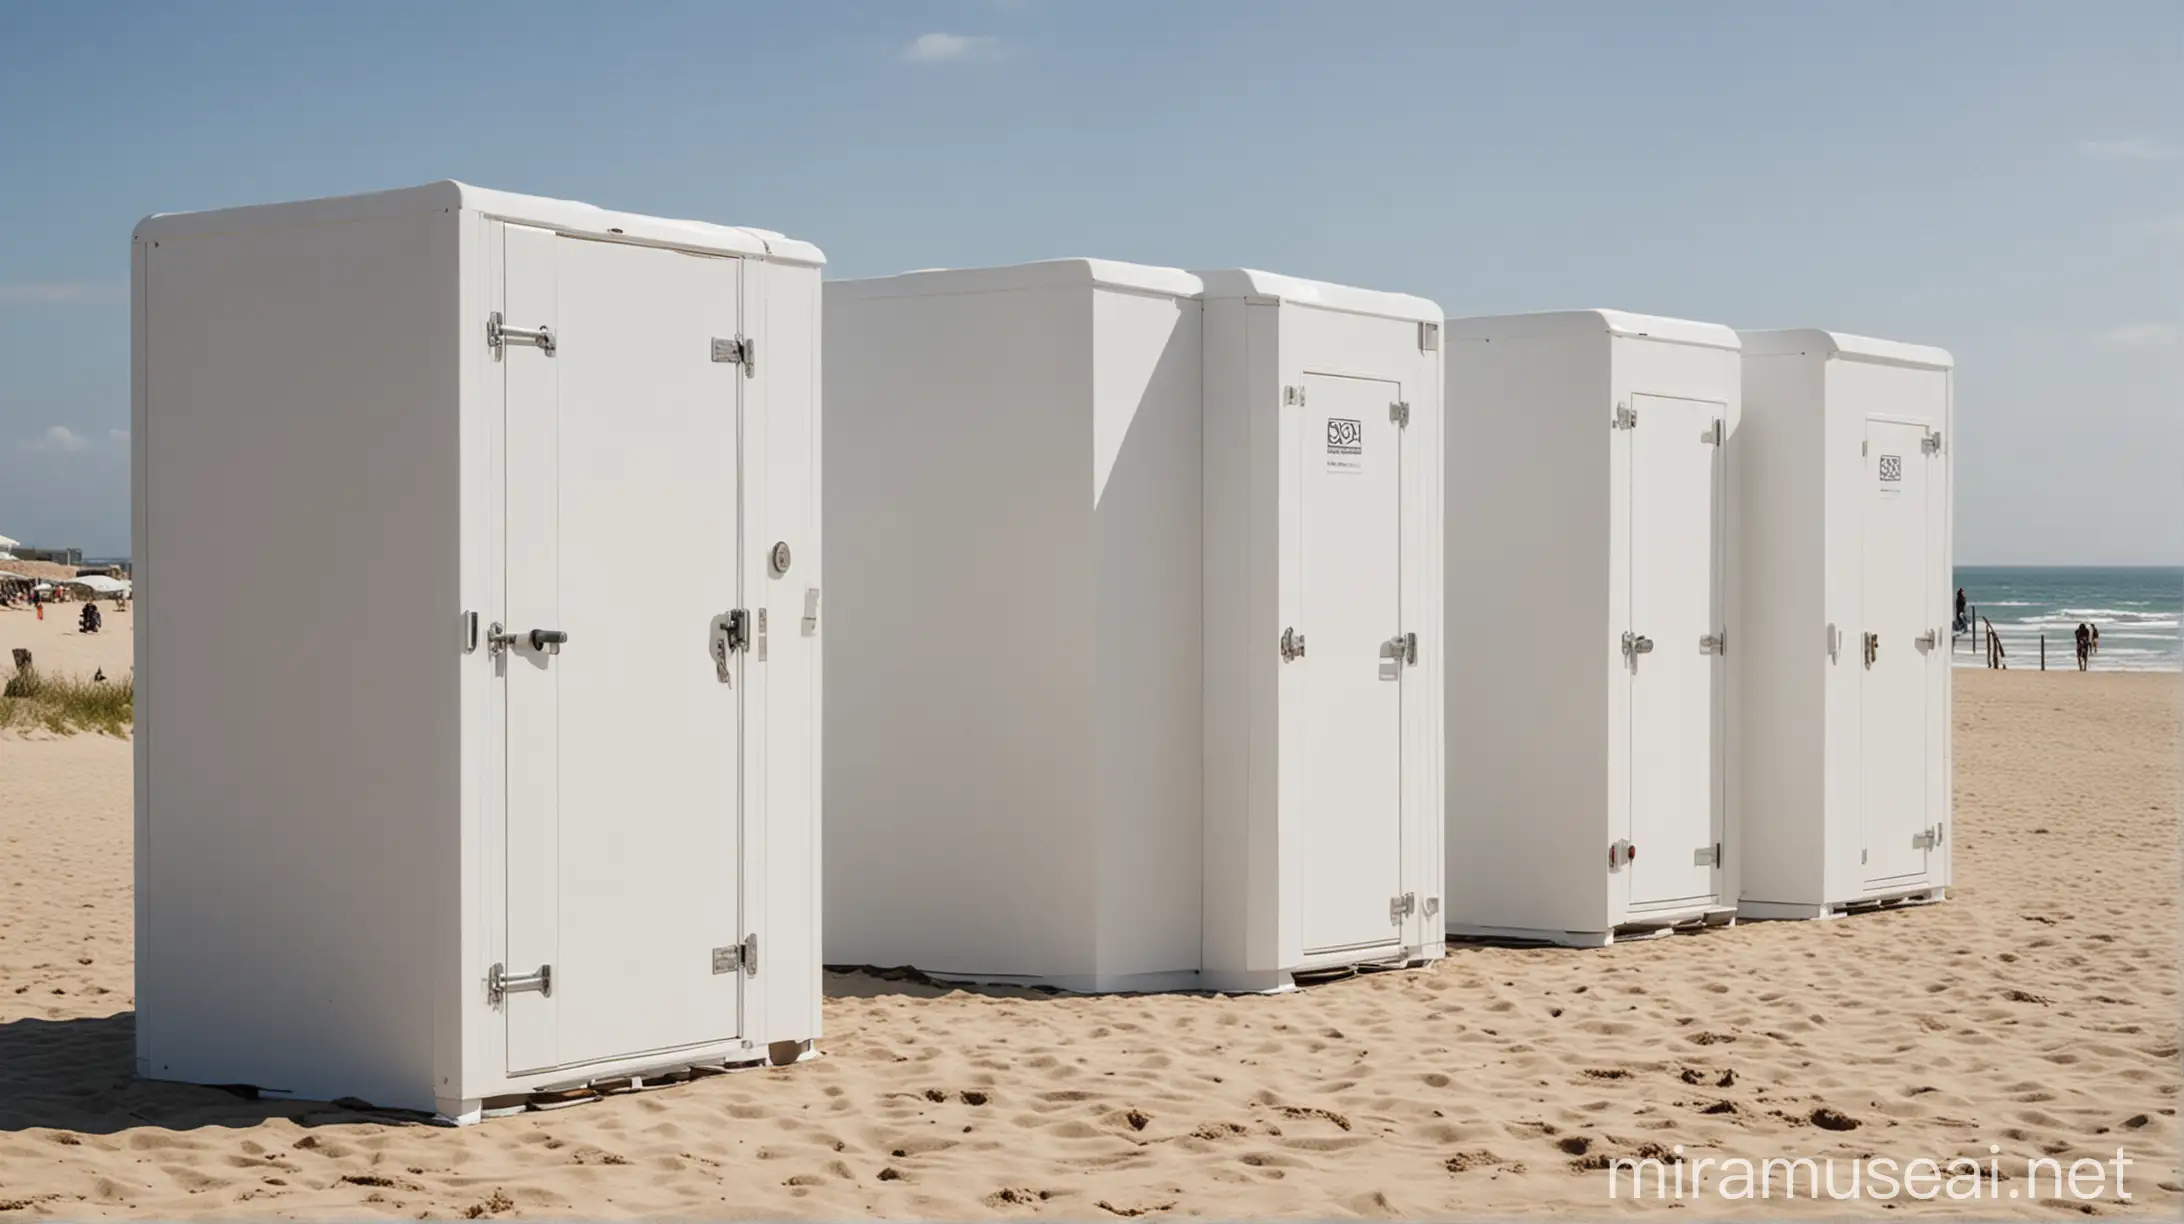 picture 4 portable changing rooms to be used on the beach, featuring a clean white aesthetic. Each changing room should include a simple sign carrier affixed to the door, 
. The design should prioritize functionality and ease of use, while maintaining a modern and minimalist appearance. 